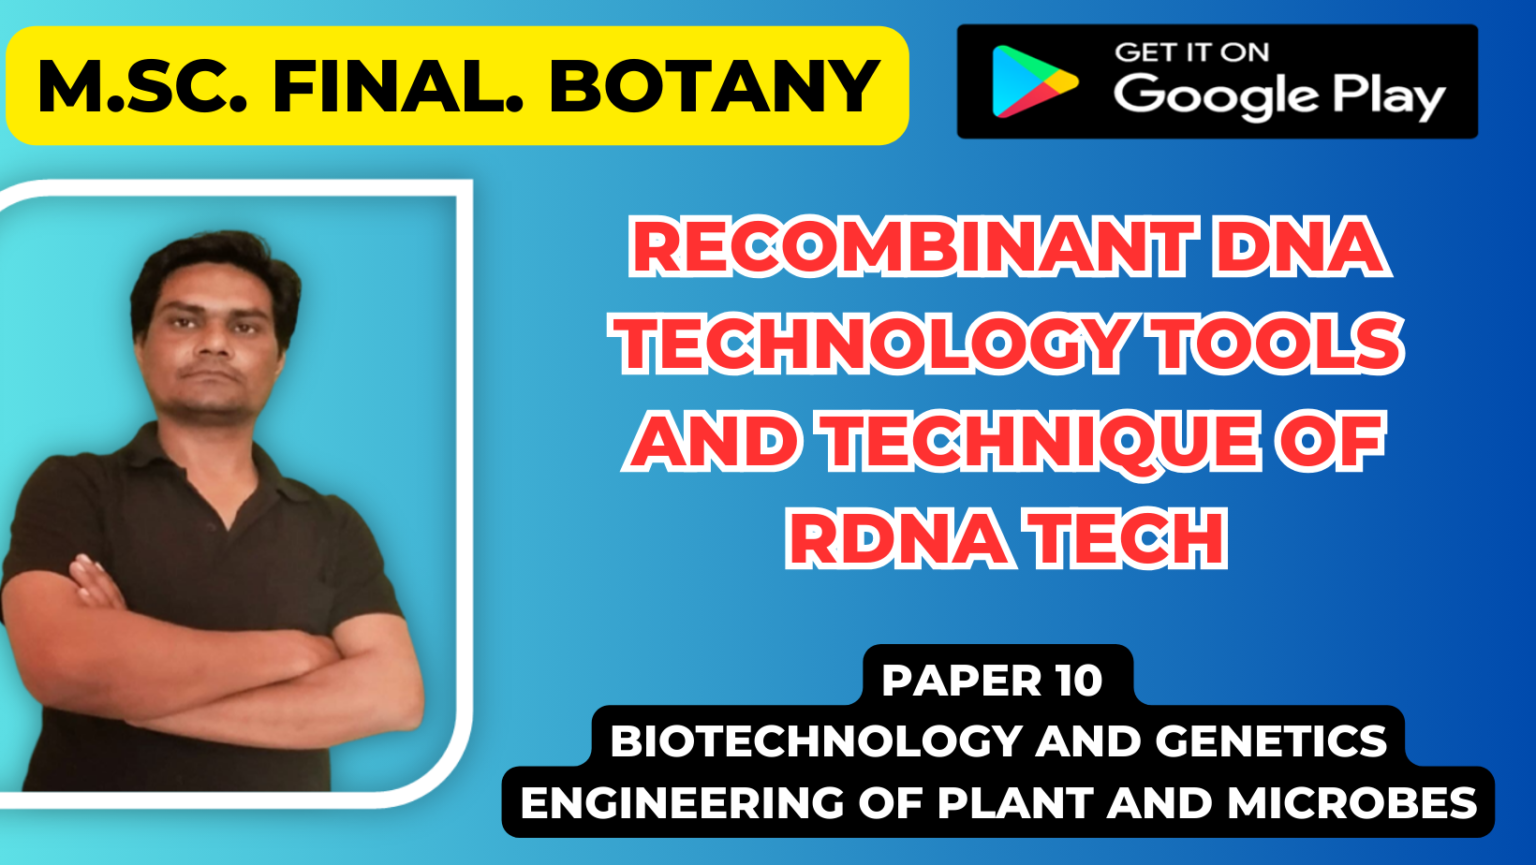 Recombinant DNA Technology Tools and Technique of rDNA Tech